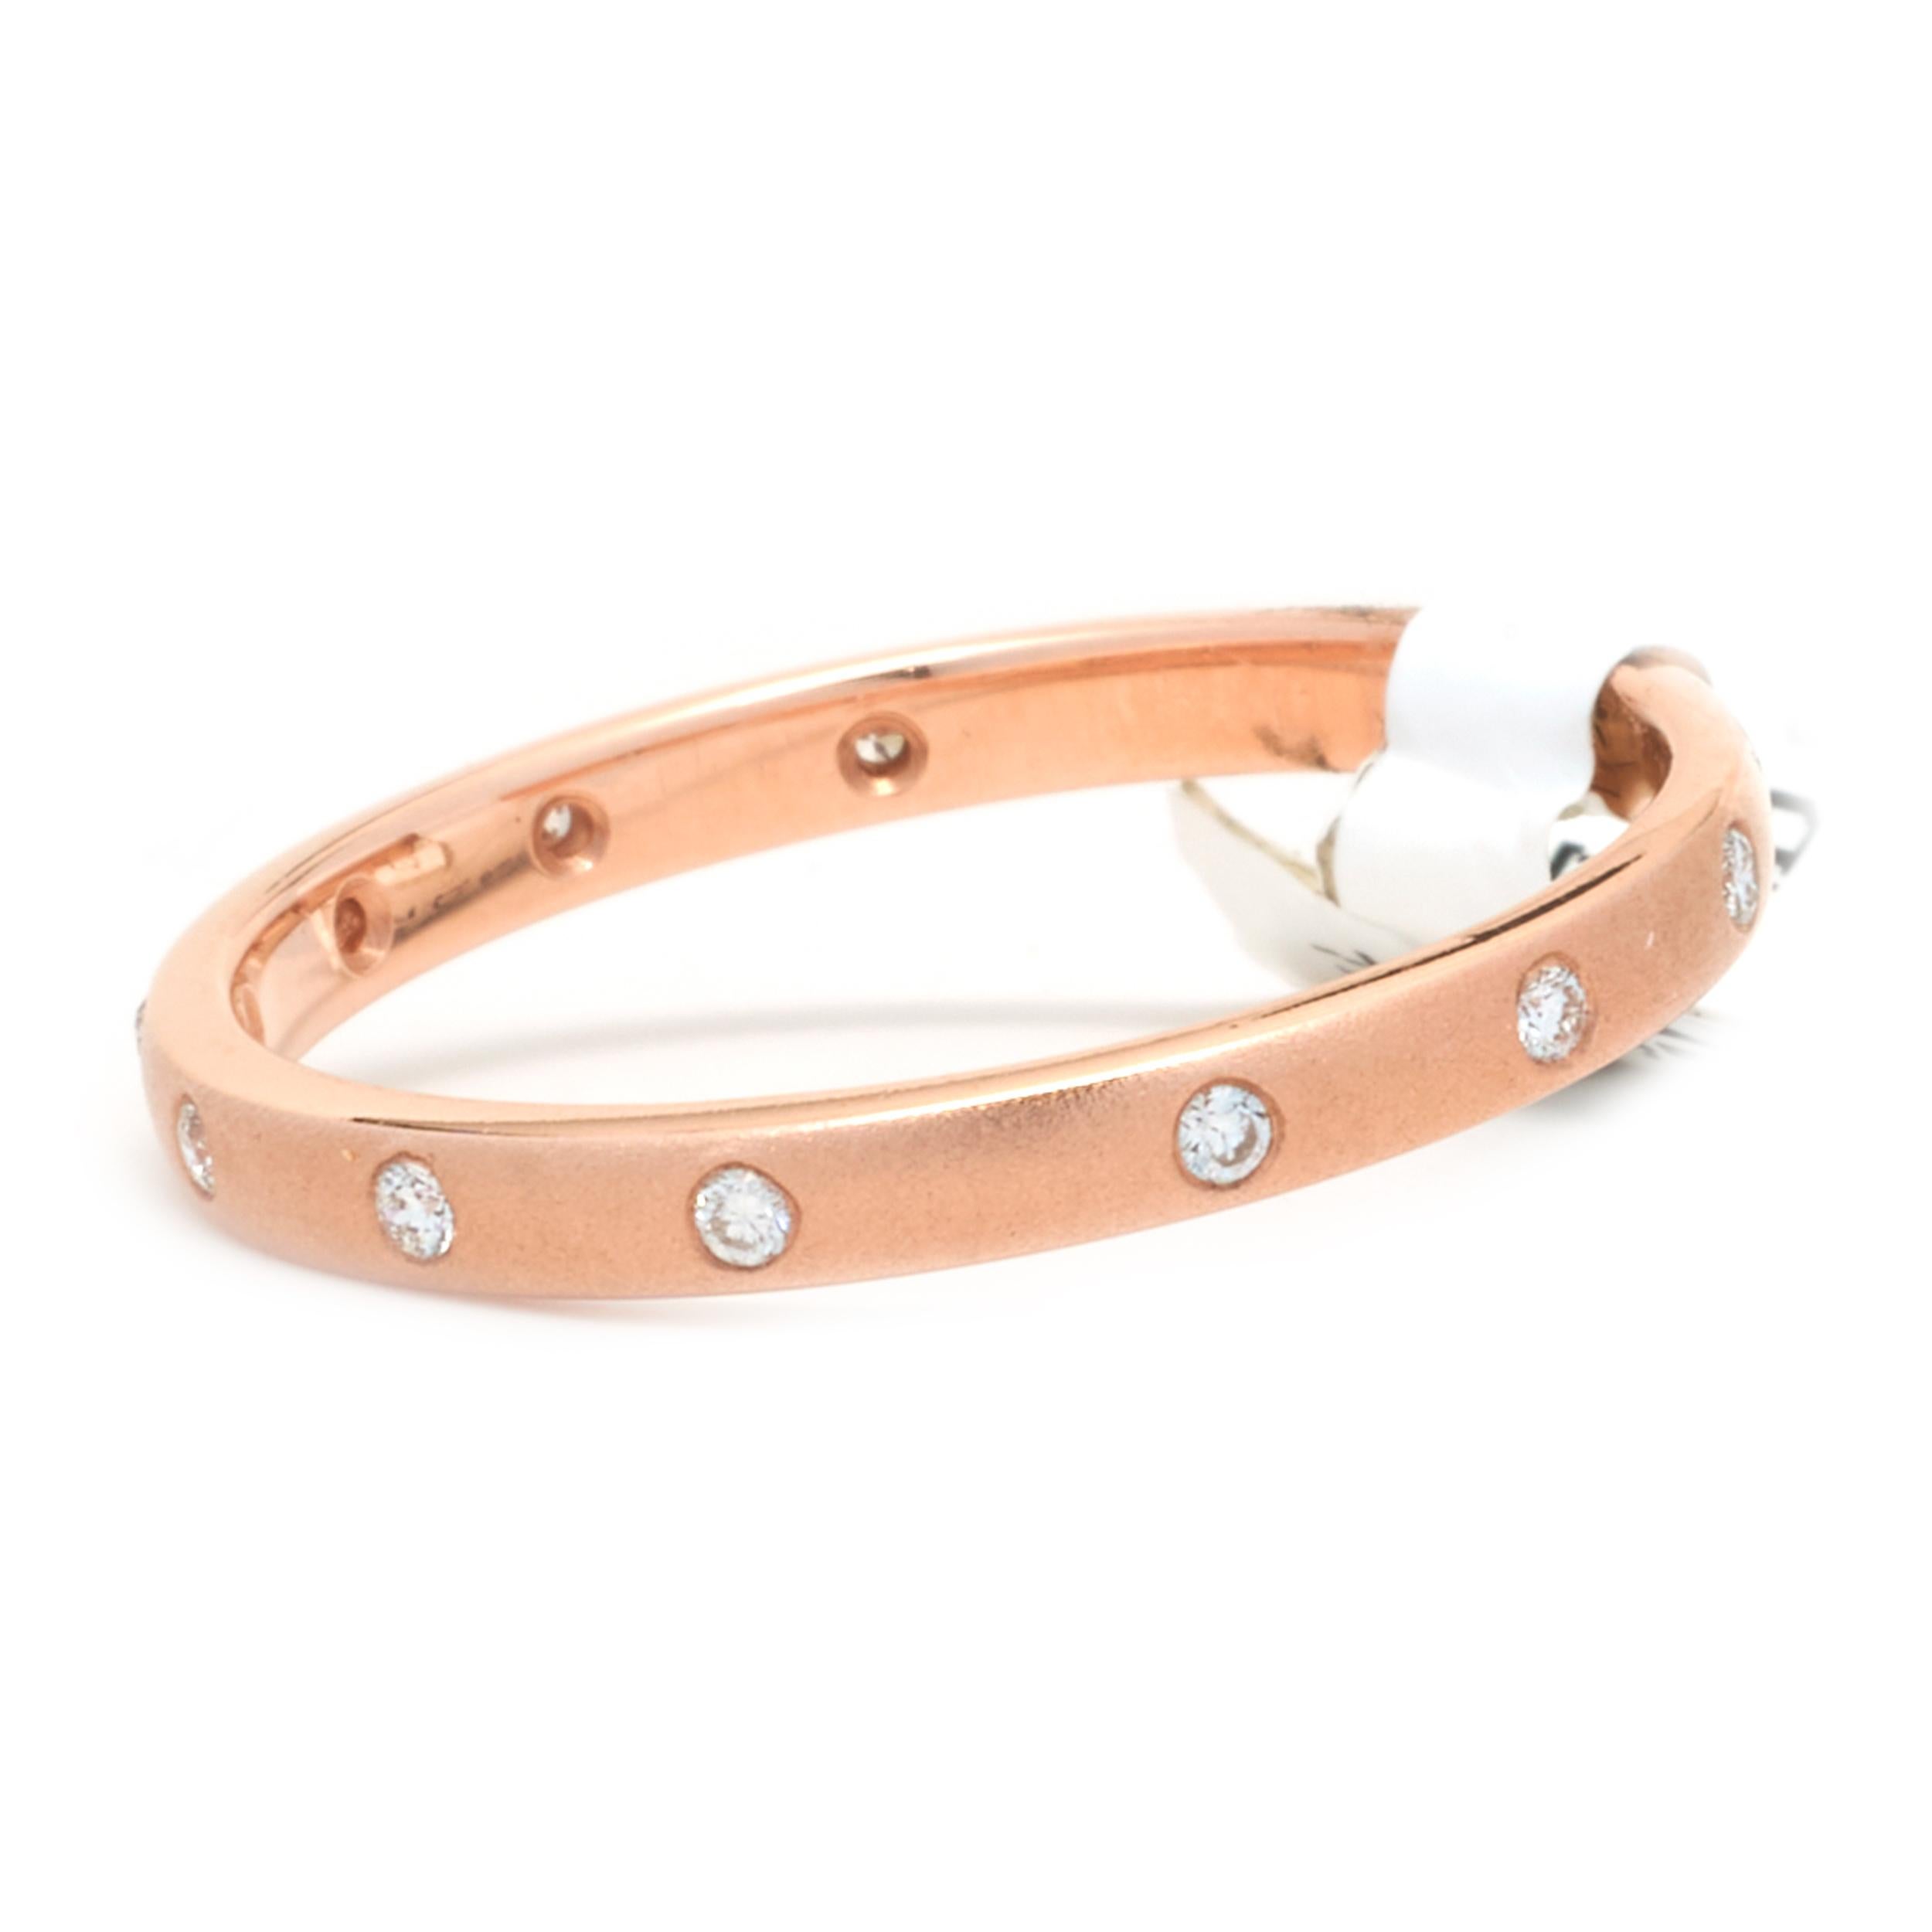 Designer: Custom
Material: 14K rose gold
Diamonds: 10 round cut = .06cttw
Color: G
Clarity: VS1
Size: 6.25
Dimensions: ring measures 2mm in width
Weight: 1.49 grams
